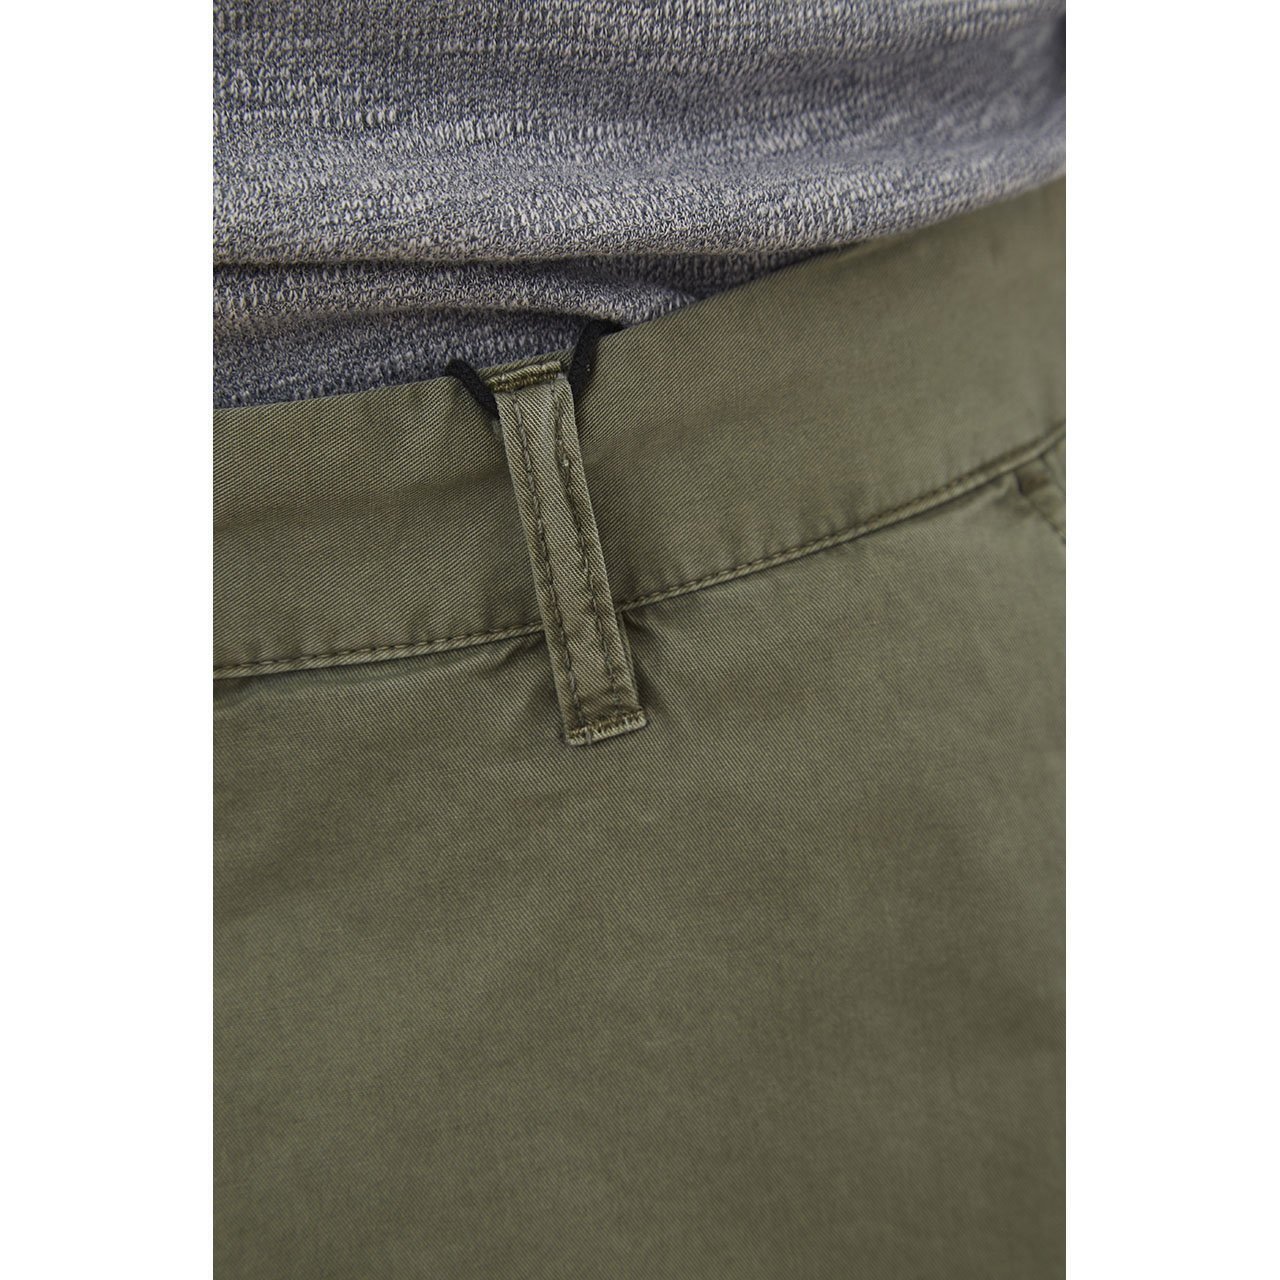 PX Clothing Men's Army Green Adan Dyed Five Pocket Twill Shorts